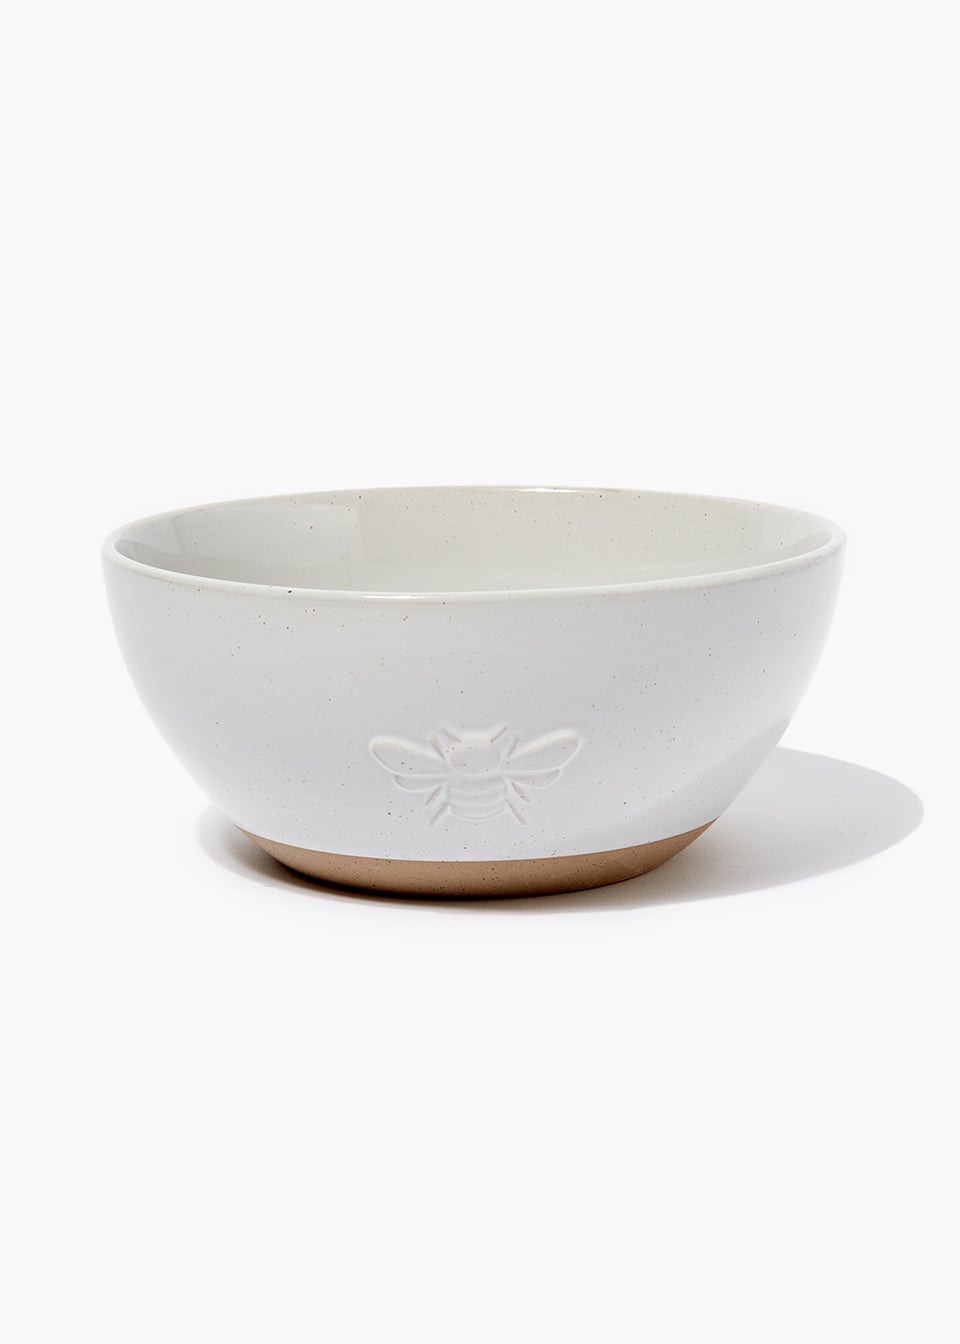 White Bee Cereal Bowl (15.5cm x 7cm)